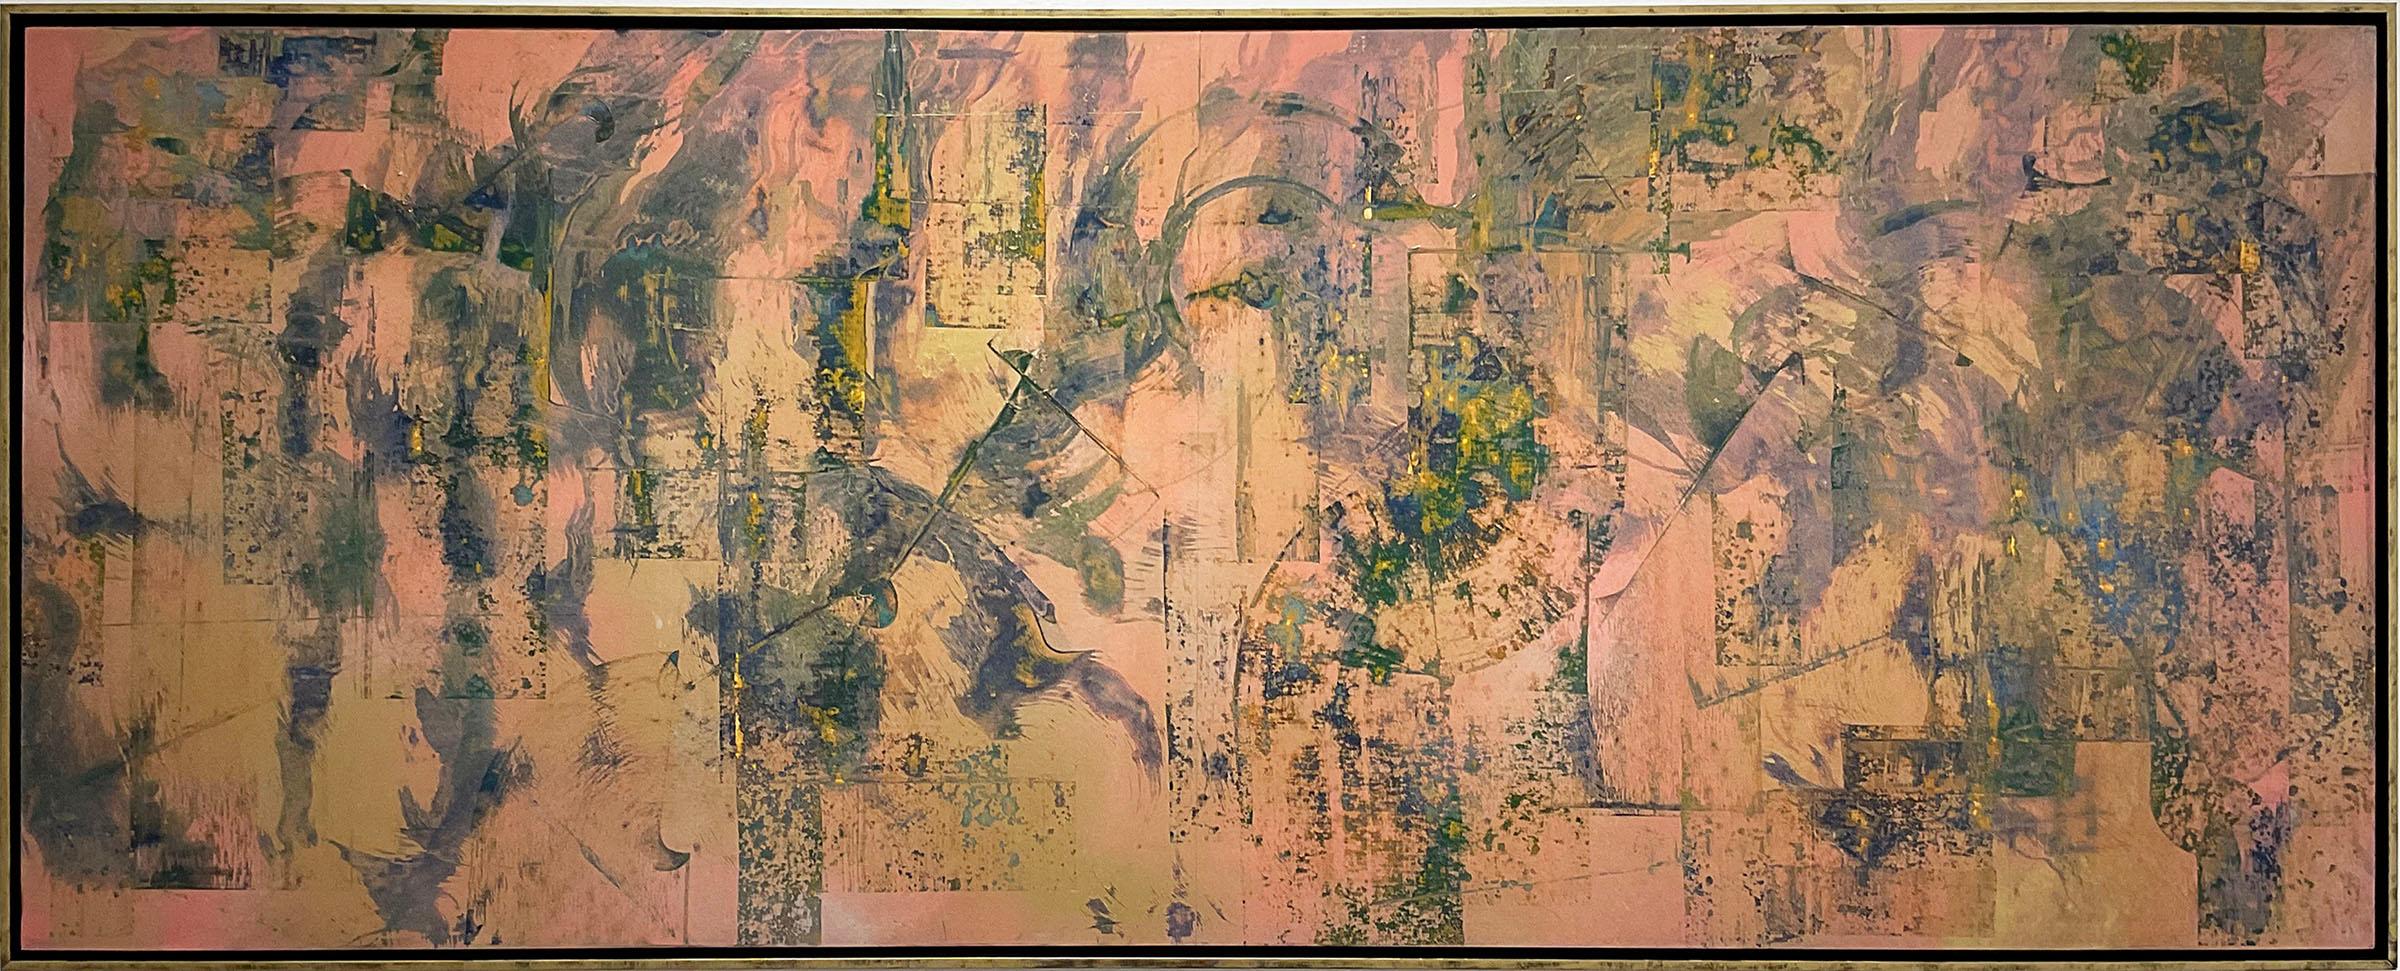 Beyond Mind and Matter: Peach & Gold Abstract Expressionist Painting